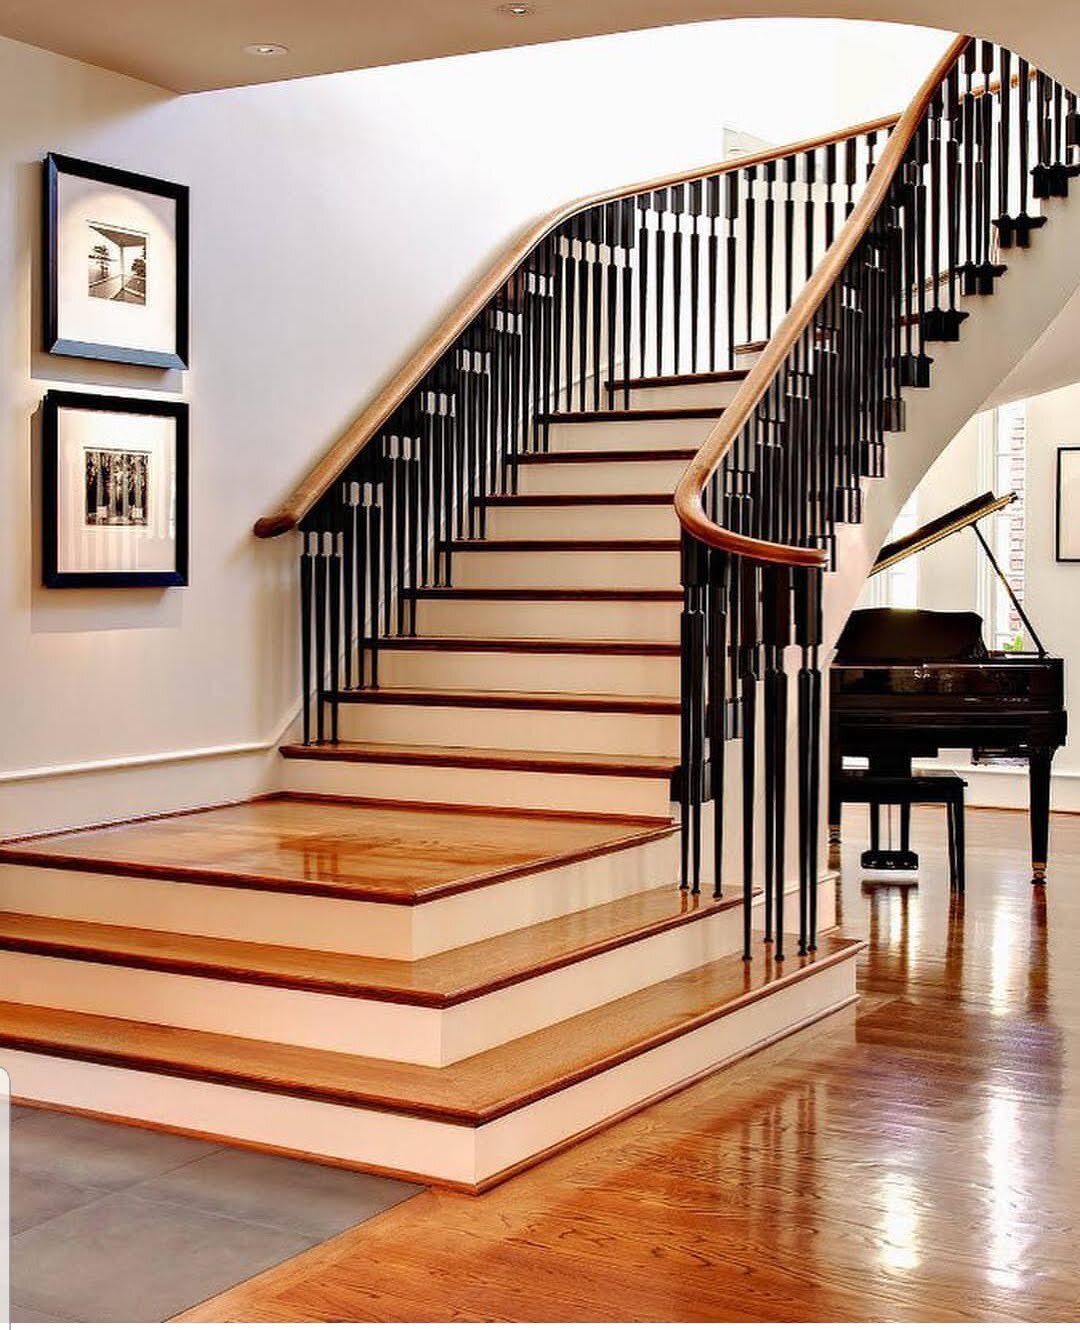 Private Res Staircase 2.jpg